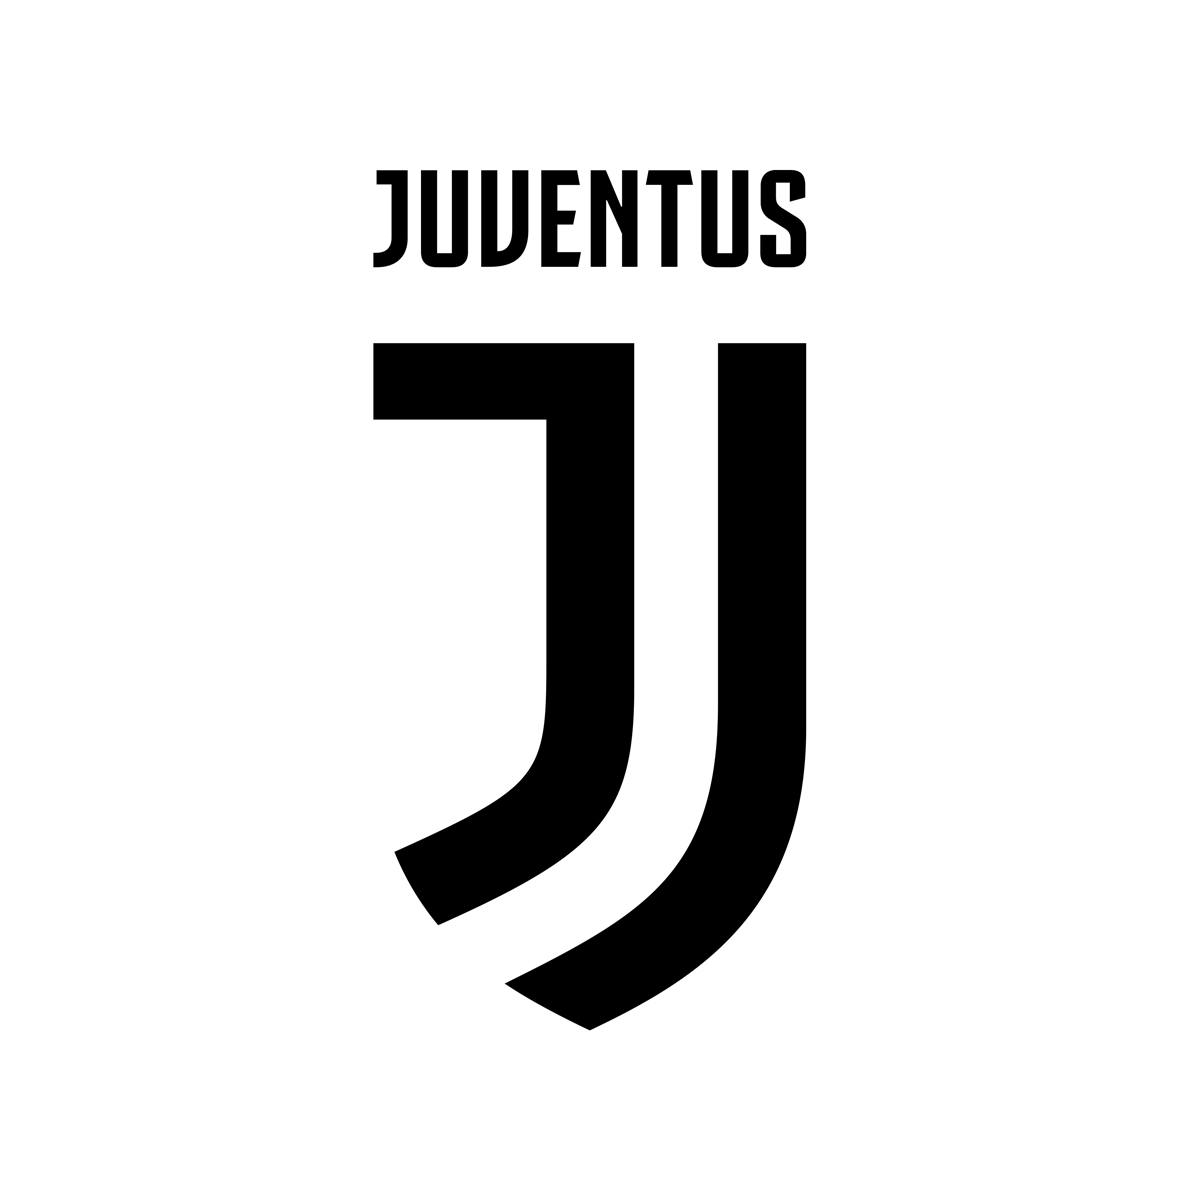 Juventus launch new logo to go 'beyond football'. Will it take them there?